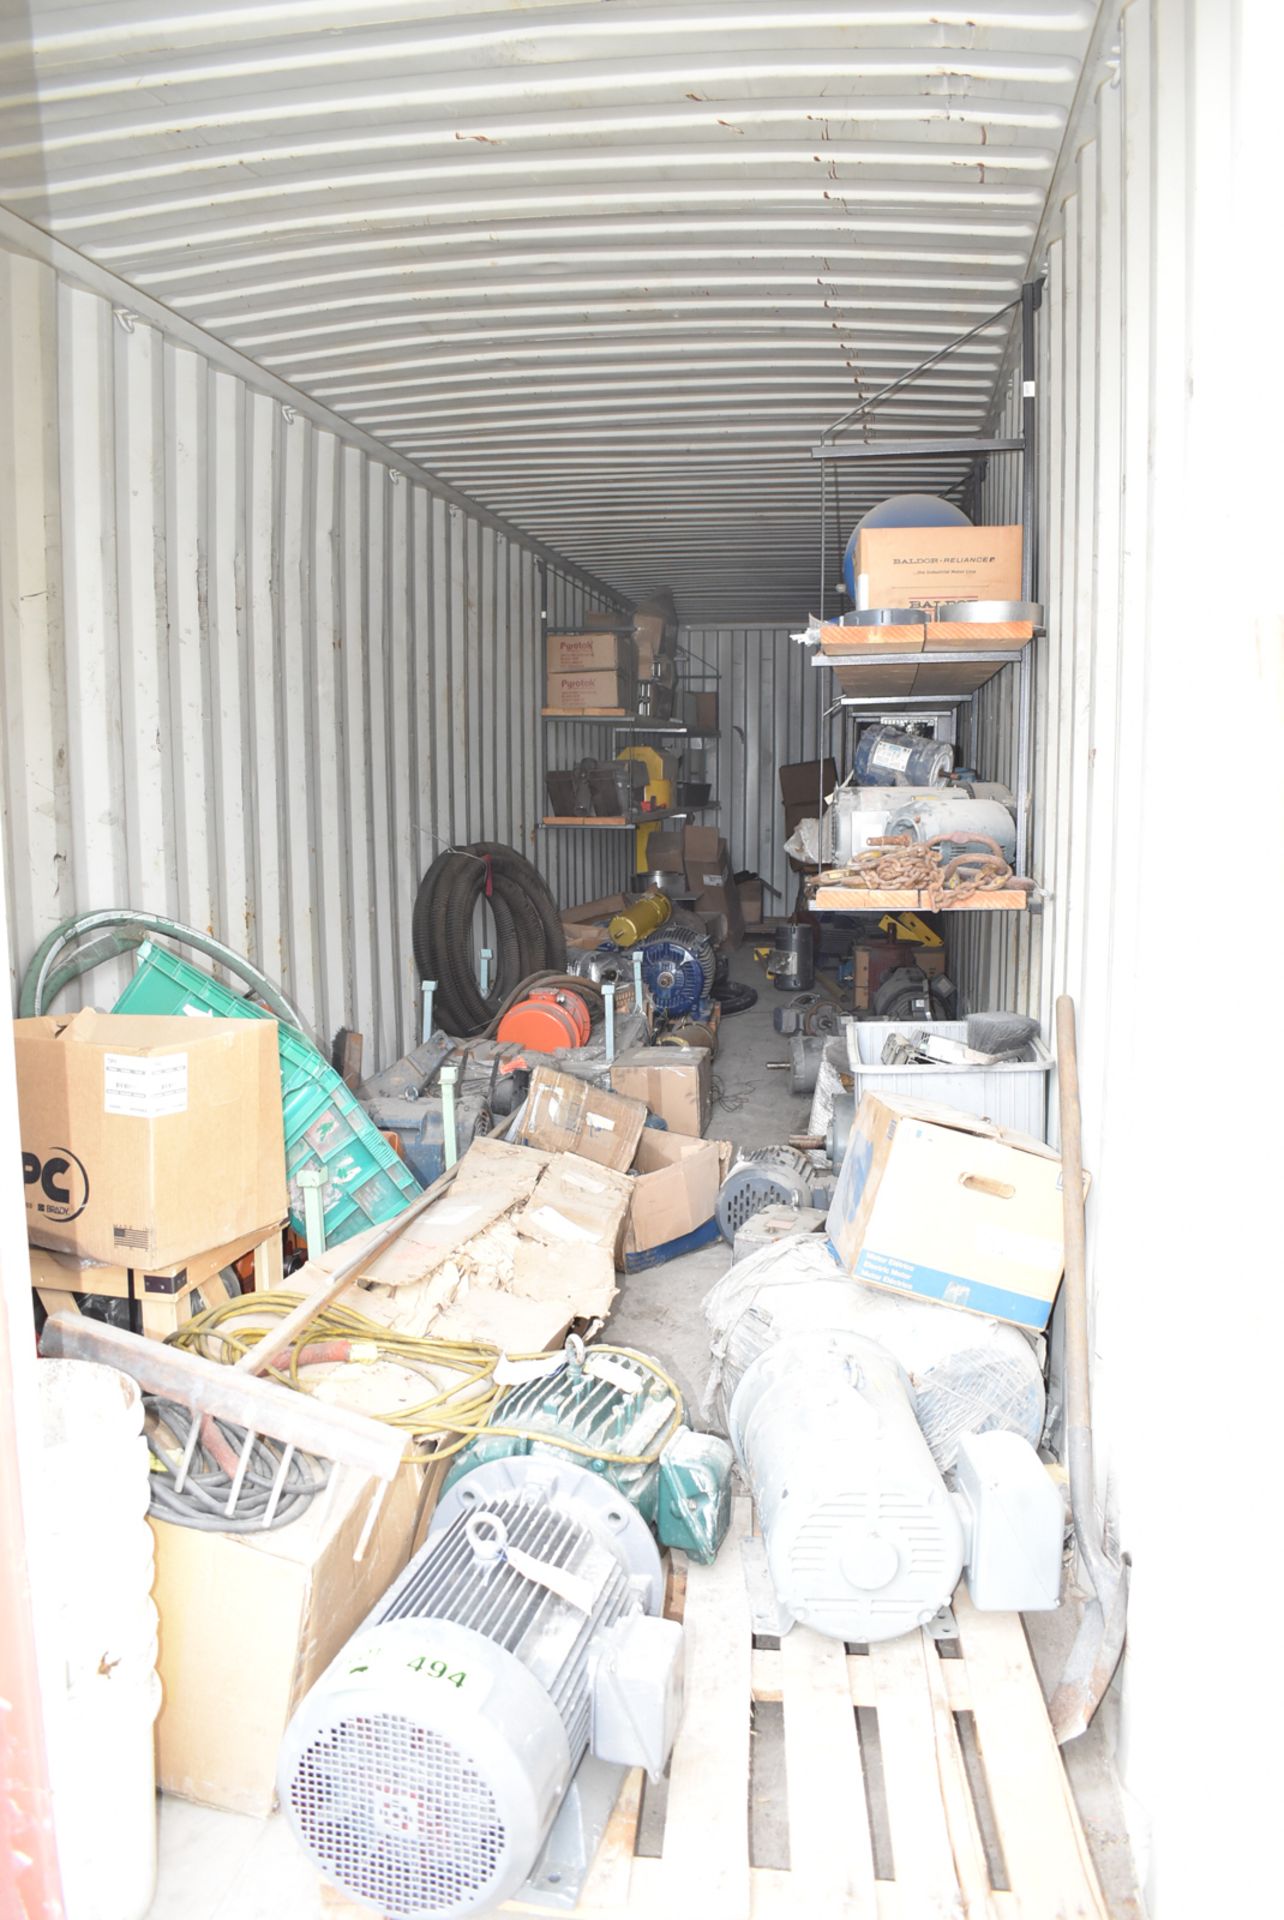 LOT/ CONTENTS OF SEA CONTAINER - SPARE MOTORS, GEARBOXES, PYROTEK DIE CASTING SUPPLIES, AIR TANK, - Image 2 of 19